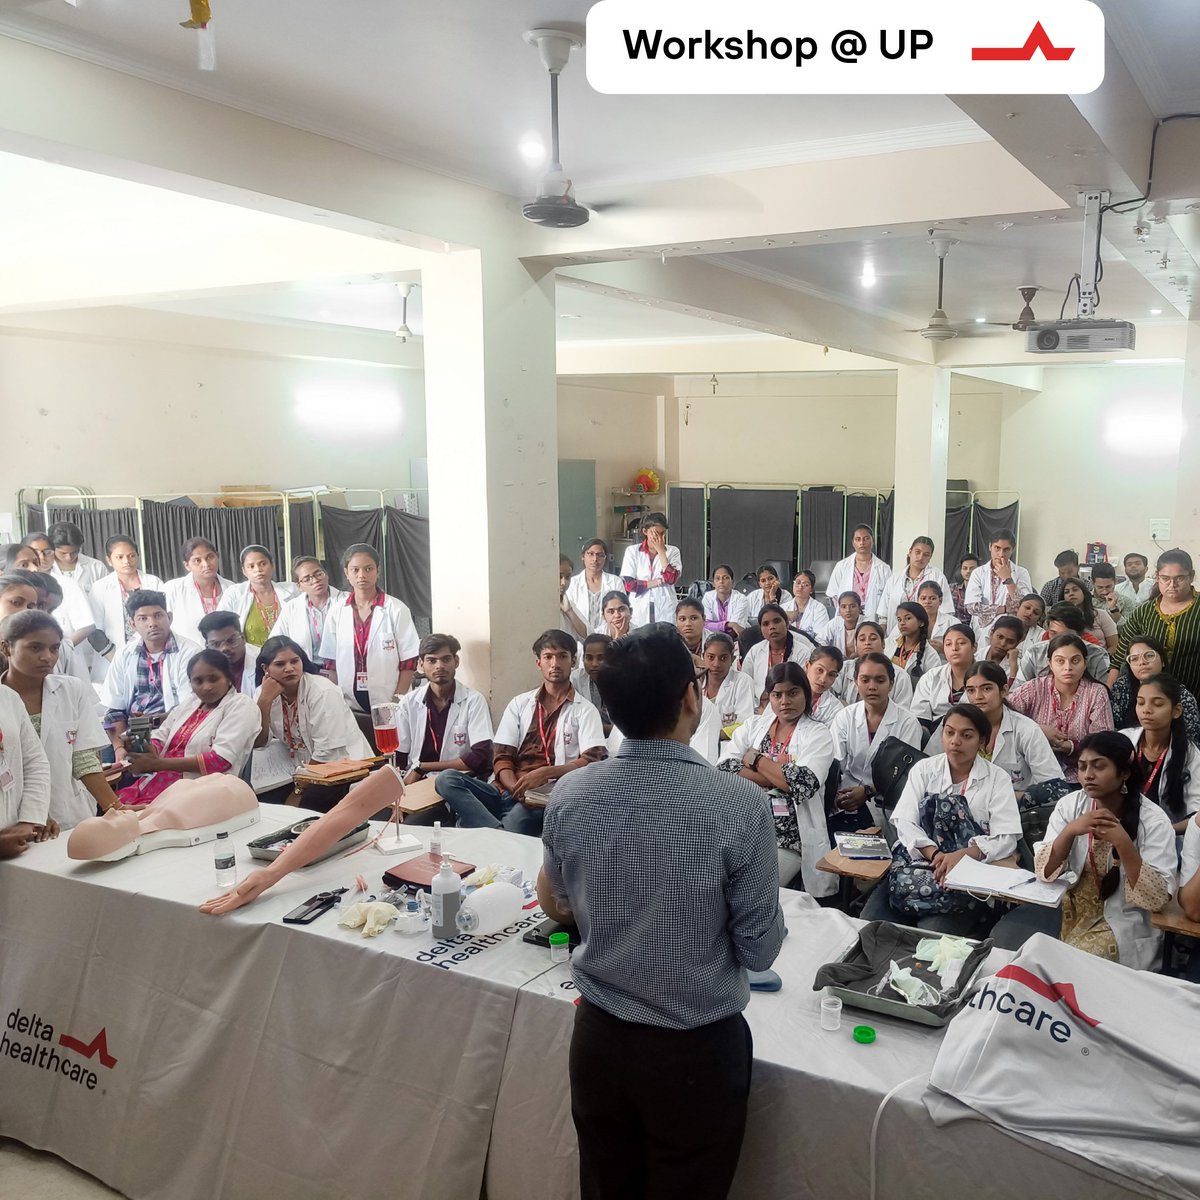 In Ghaziabad.
#medicaleducation

Passionate Trainers | Well-crafted Products #patientsafety

our flourishing | purpose-driven new initiative
#skillstraining

Would you like to arrange a training session at your institute/hospital ?
Contact our dynamic #team